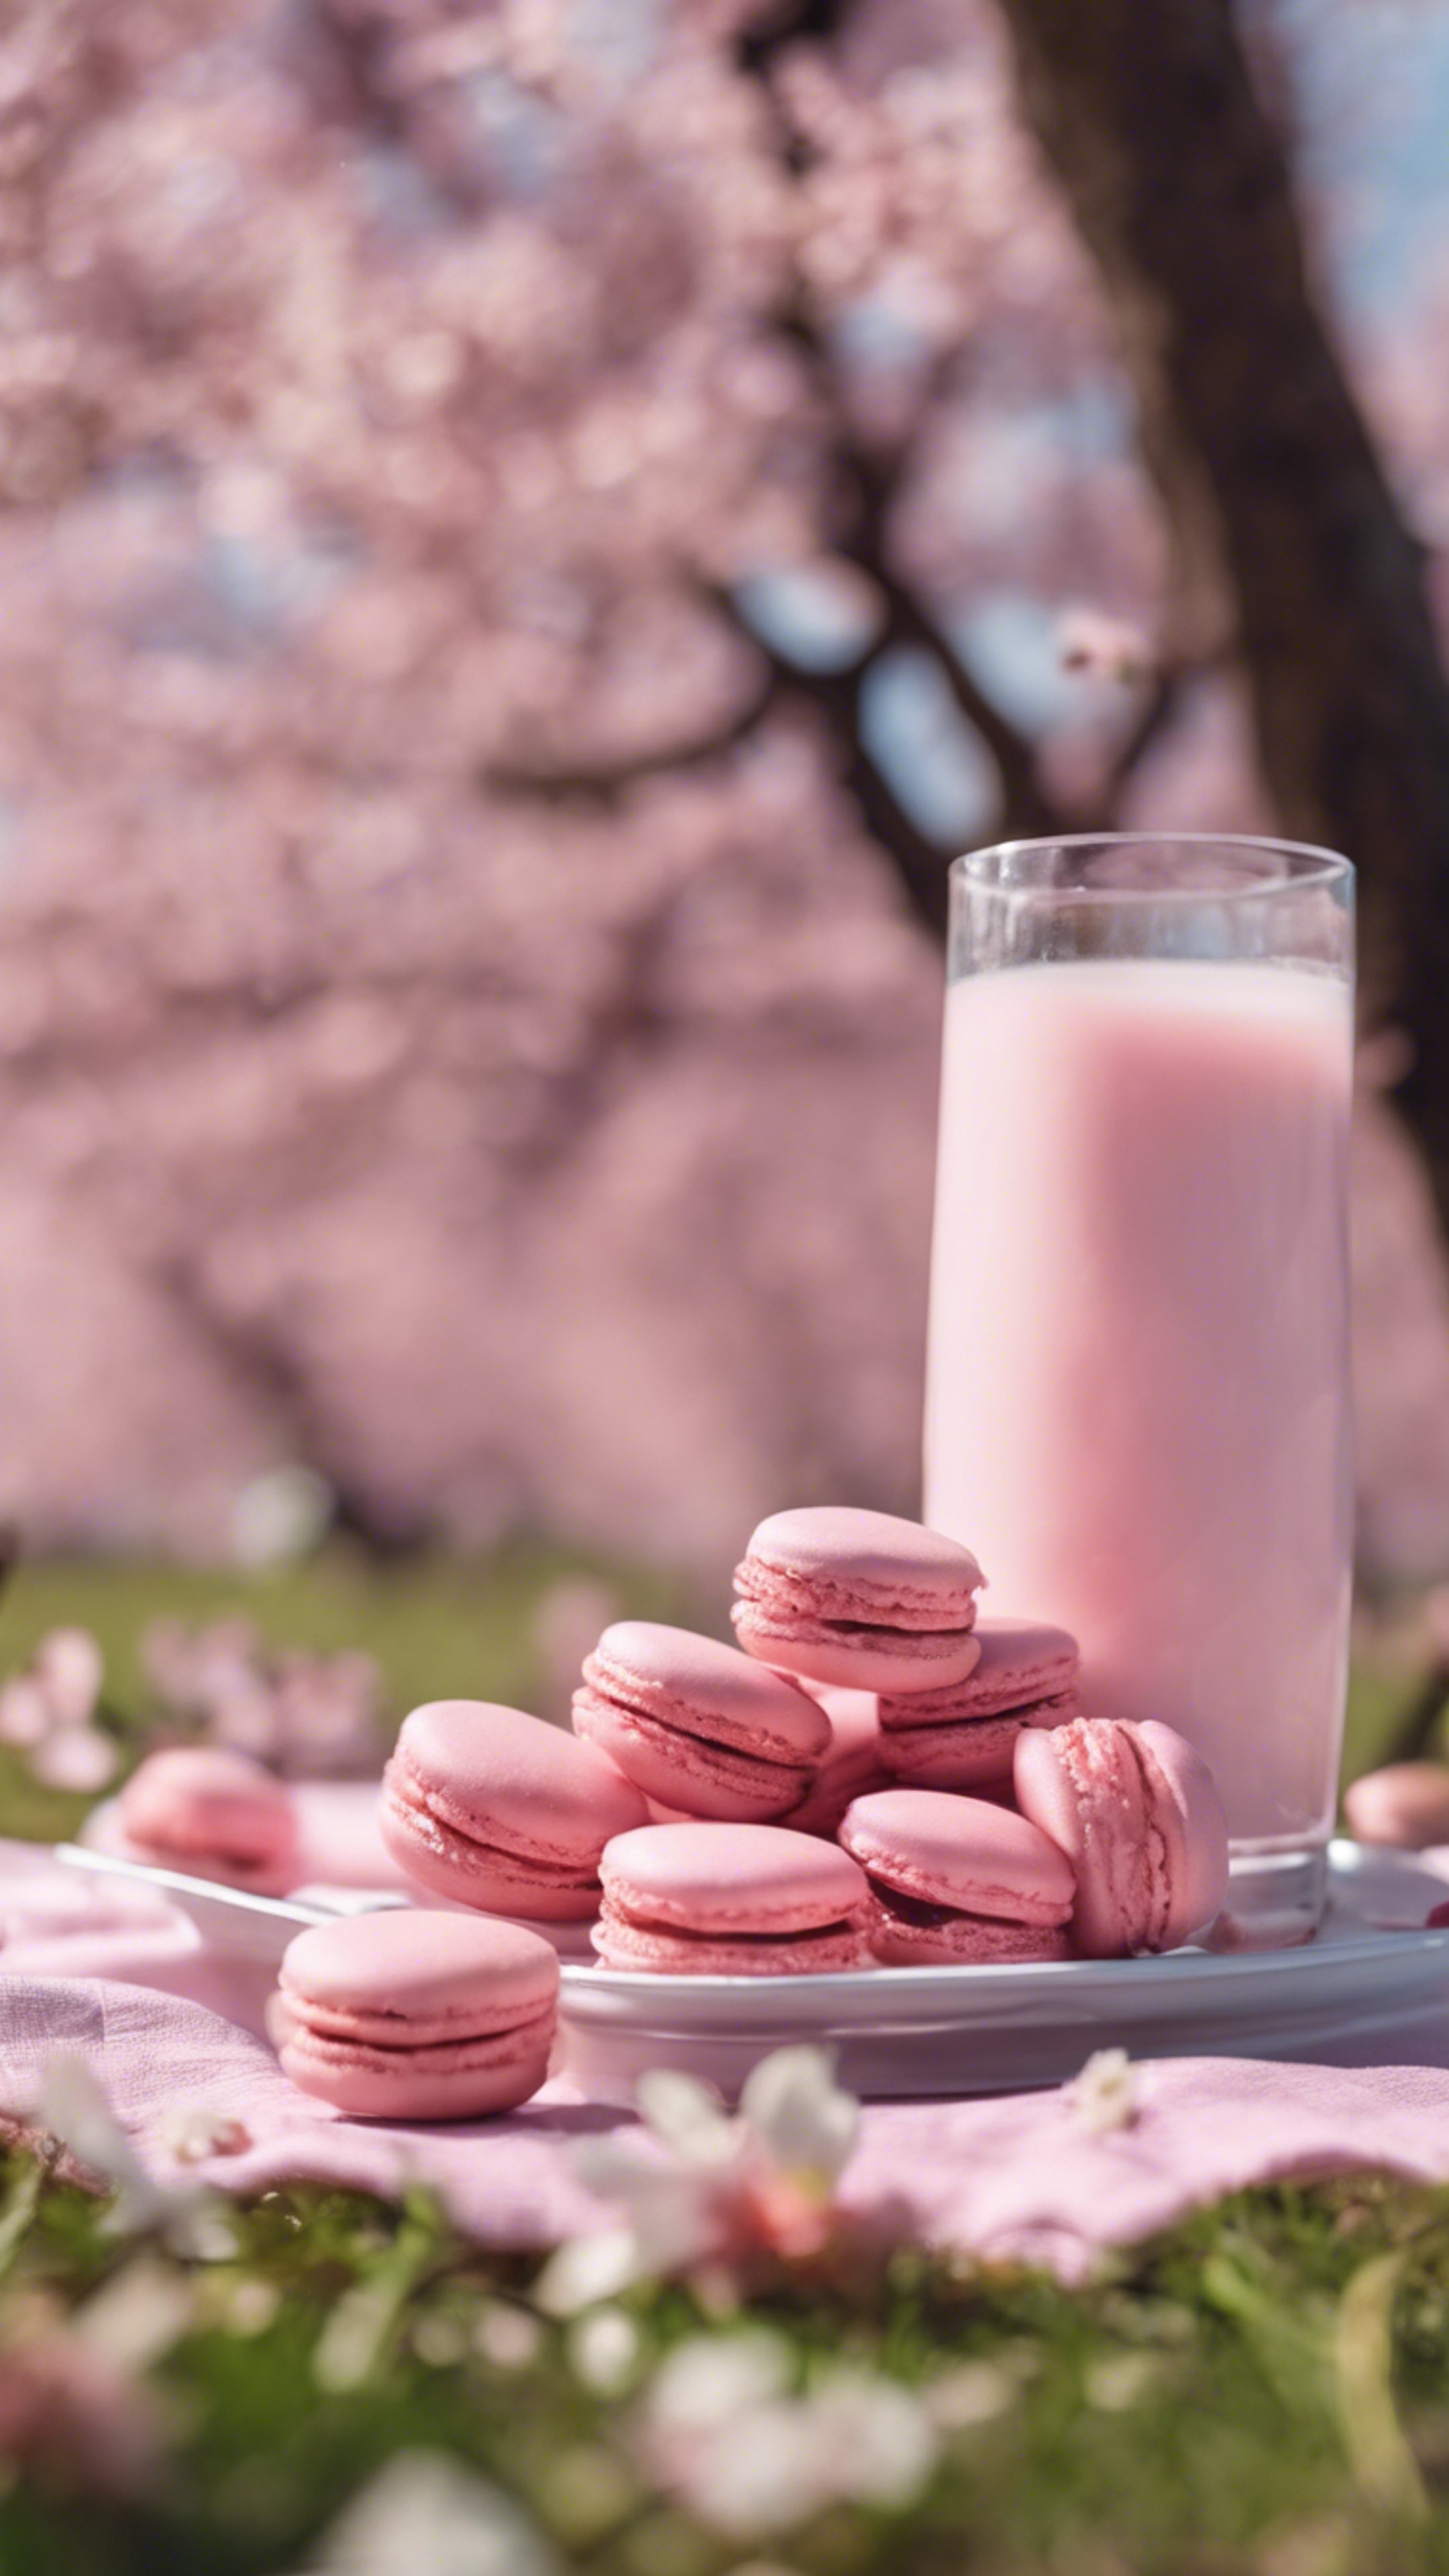 A picnic under the cherry blossoms with pink macaroons and strawberry milk. Tapet[97540e72ef6b46bcbaa8]